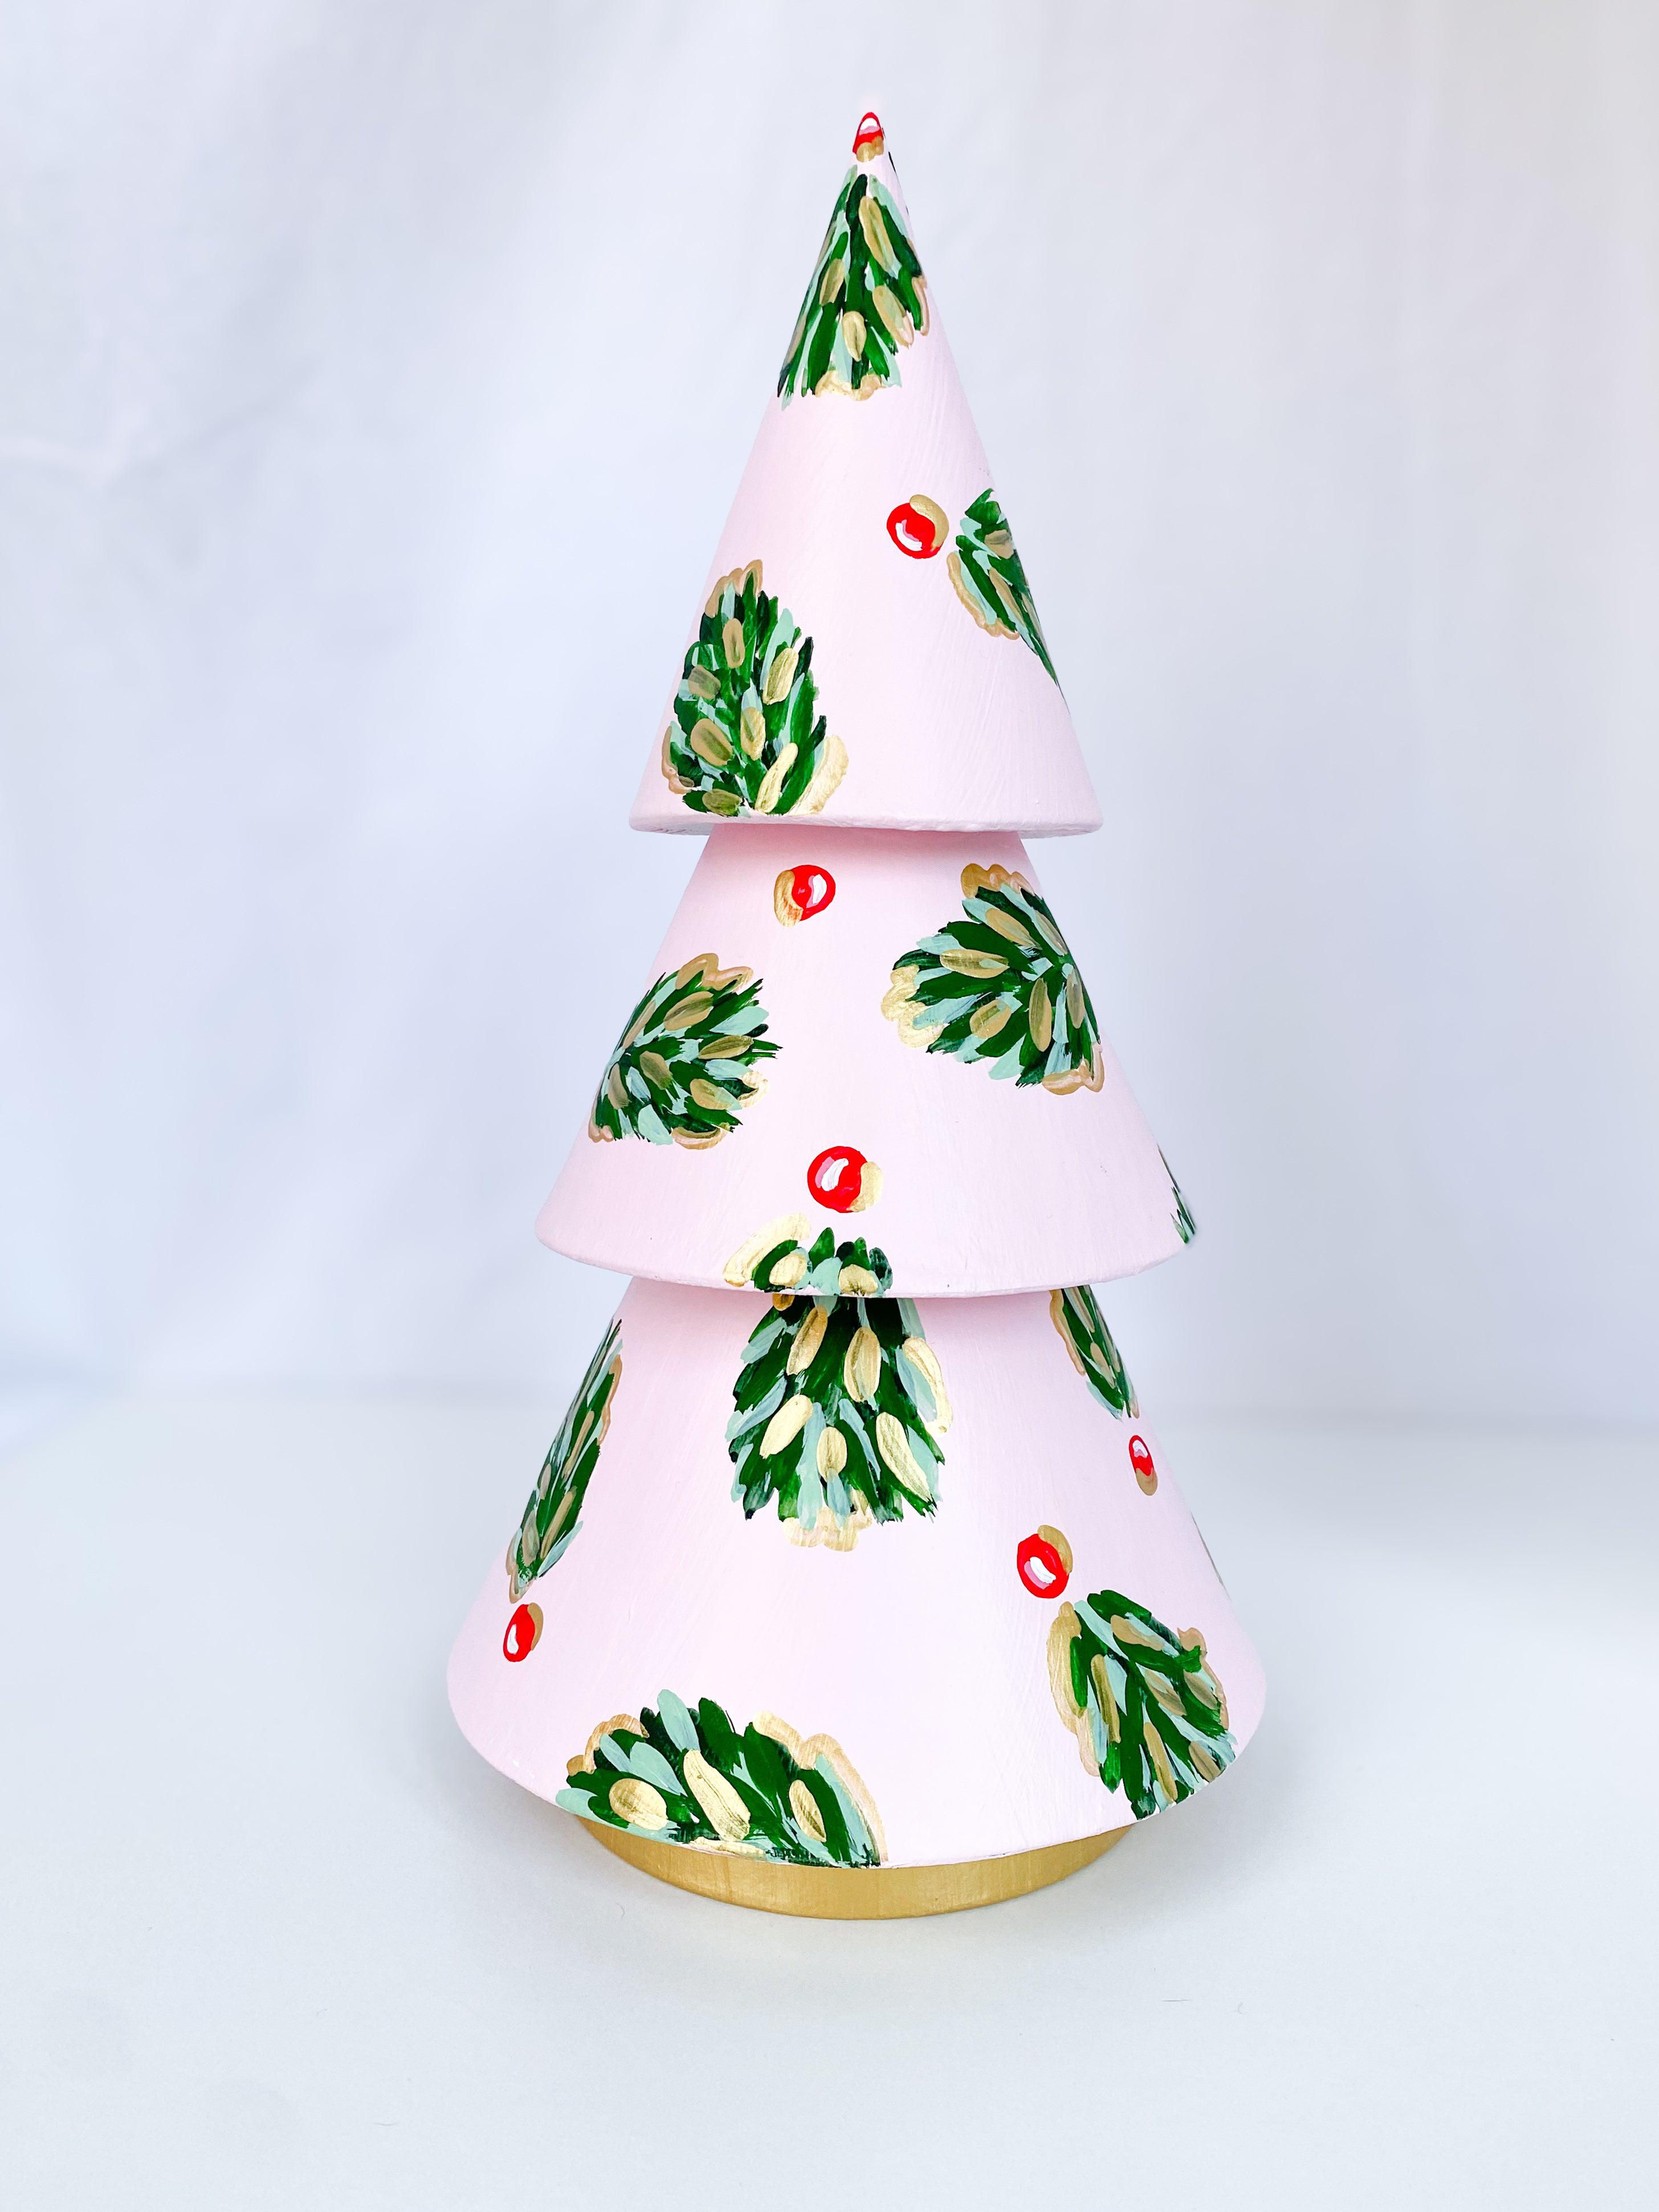 Frosty Pink Golden Holly Mini Tree - Tall-Hand-Painted Mini Christmas Tree | Measures 12" tall and approx. 6" wide | Features the Golden Holly design with a pale pink base and shimmery gold accents and gold trunk | Light-weight and non-breakable paper mache tree | Coated with a protective matte finish that will keep it shimmering year after year | Each tree is slightly different with potential small imperfections due to the hand-painted nature, making each one special and unique!-The Singing Little Bird